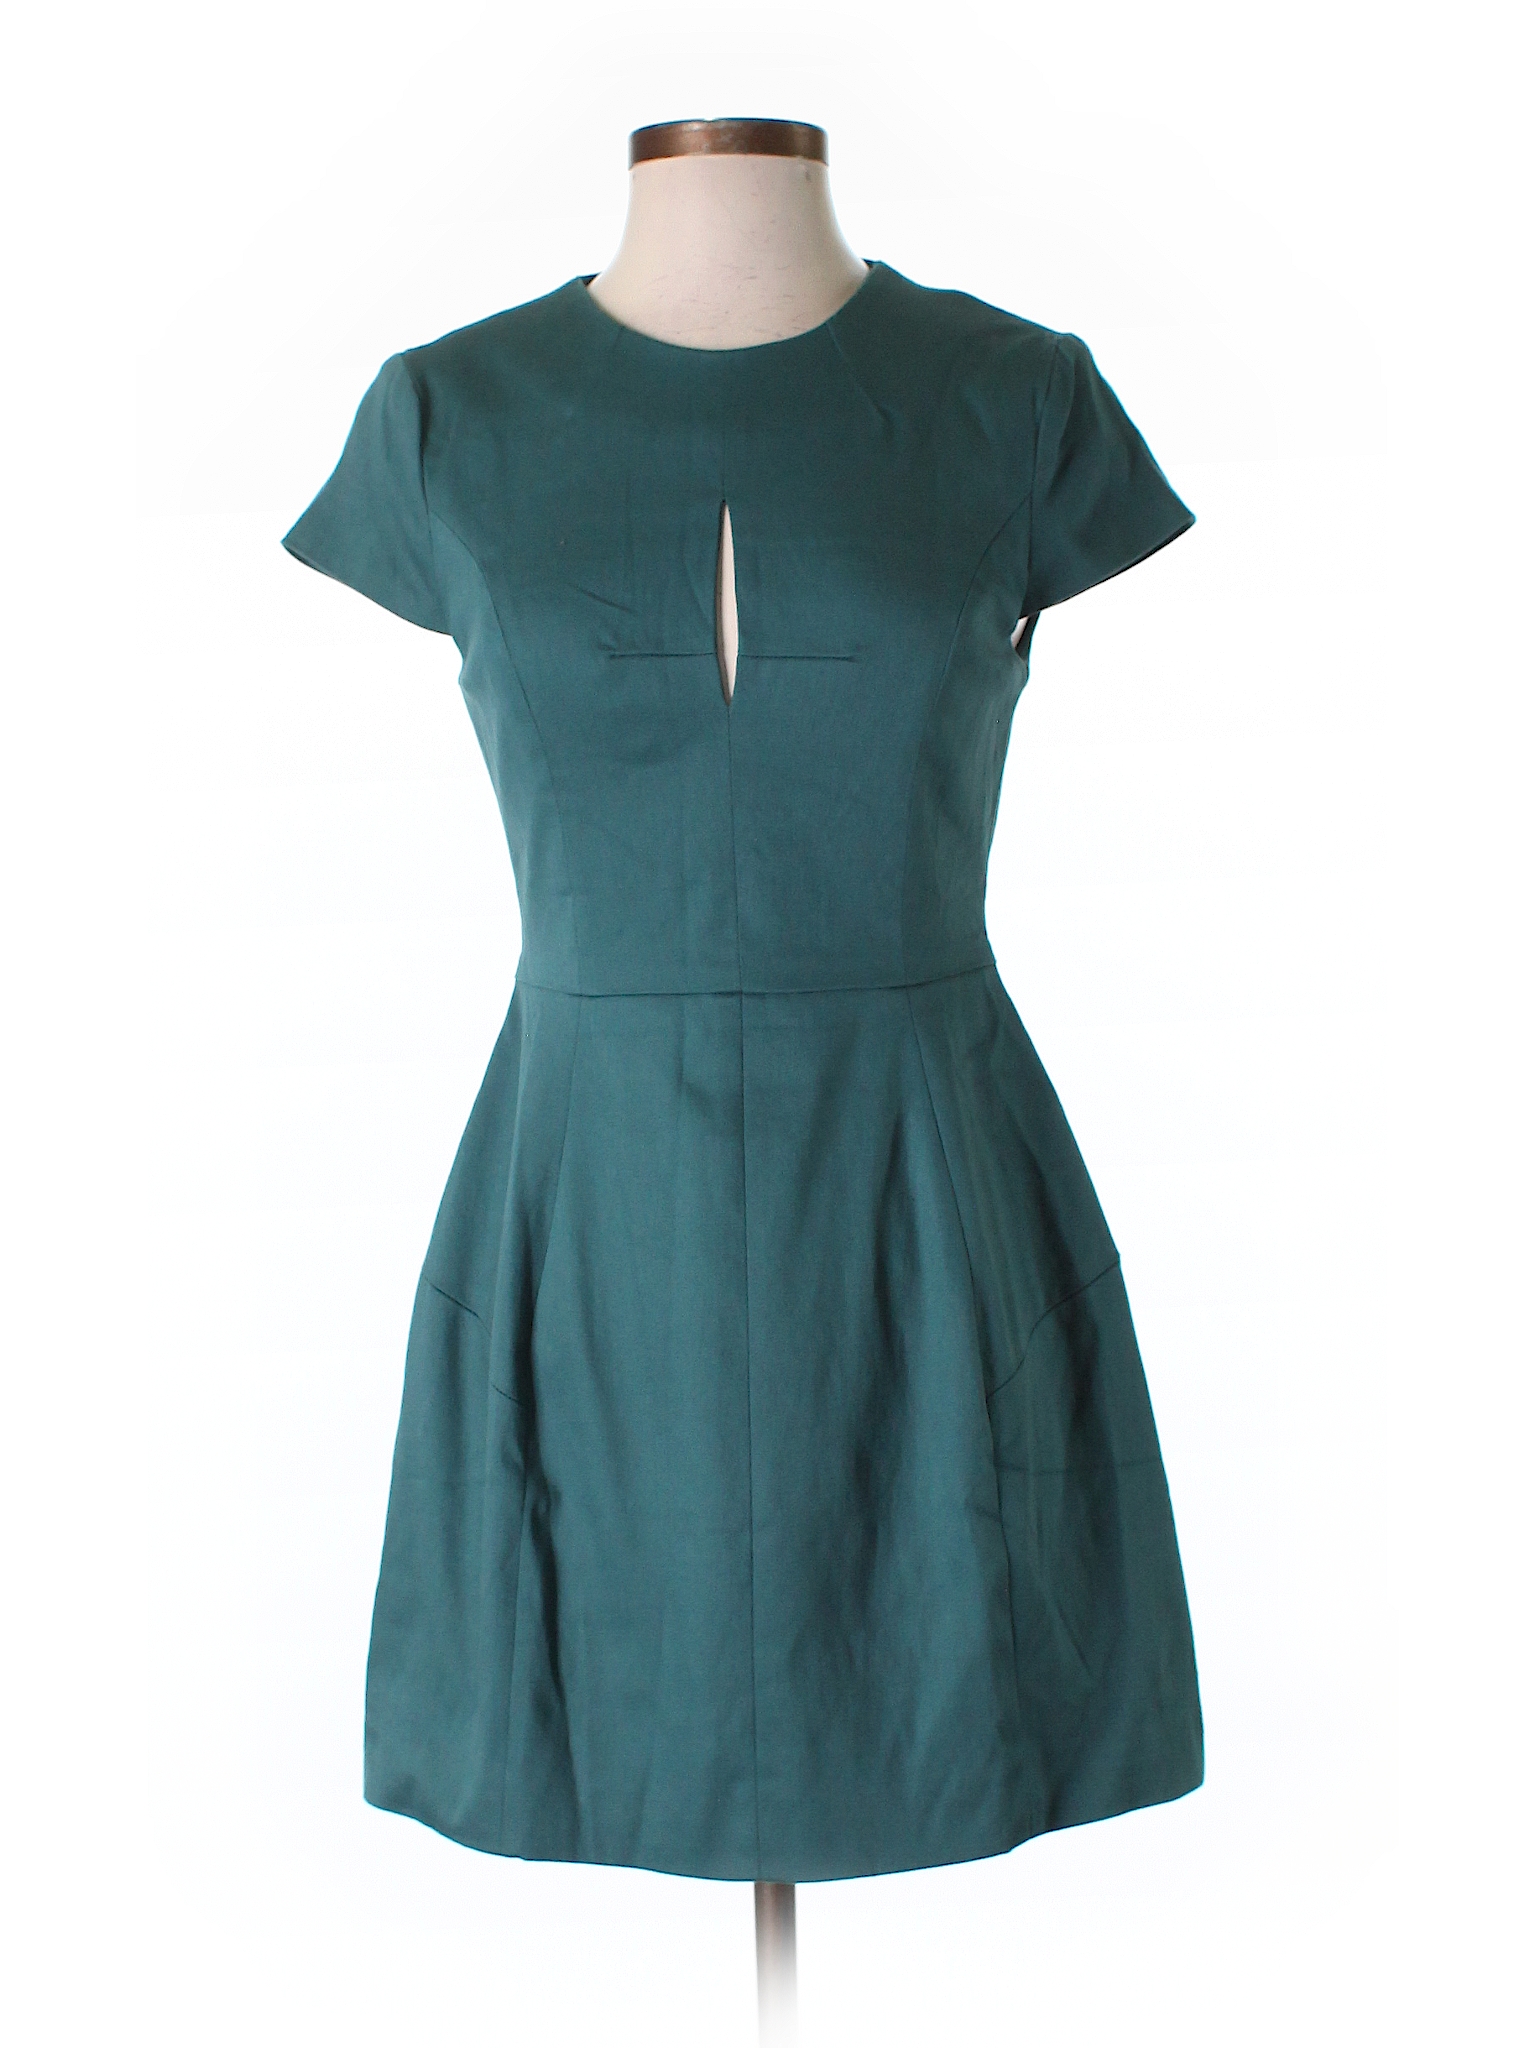 Nameless Casual Dress - 69% off only on thredUP